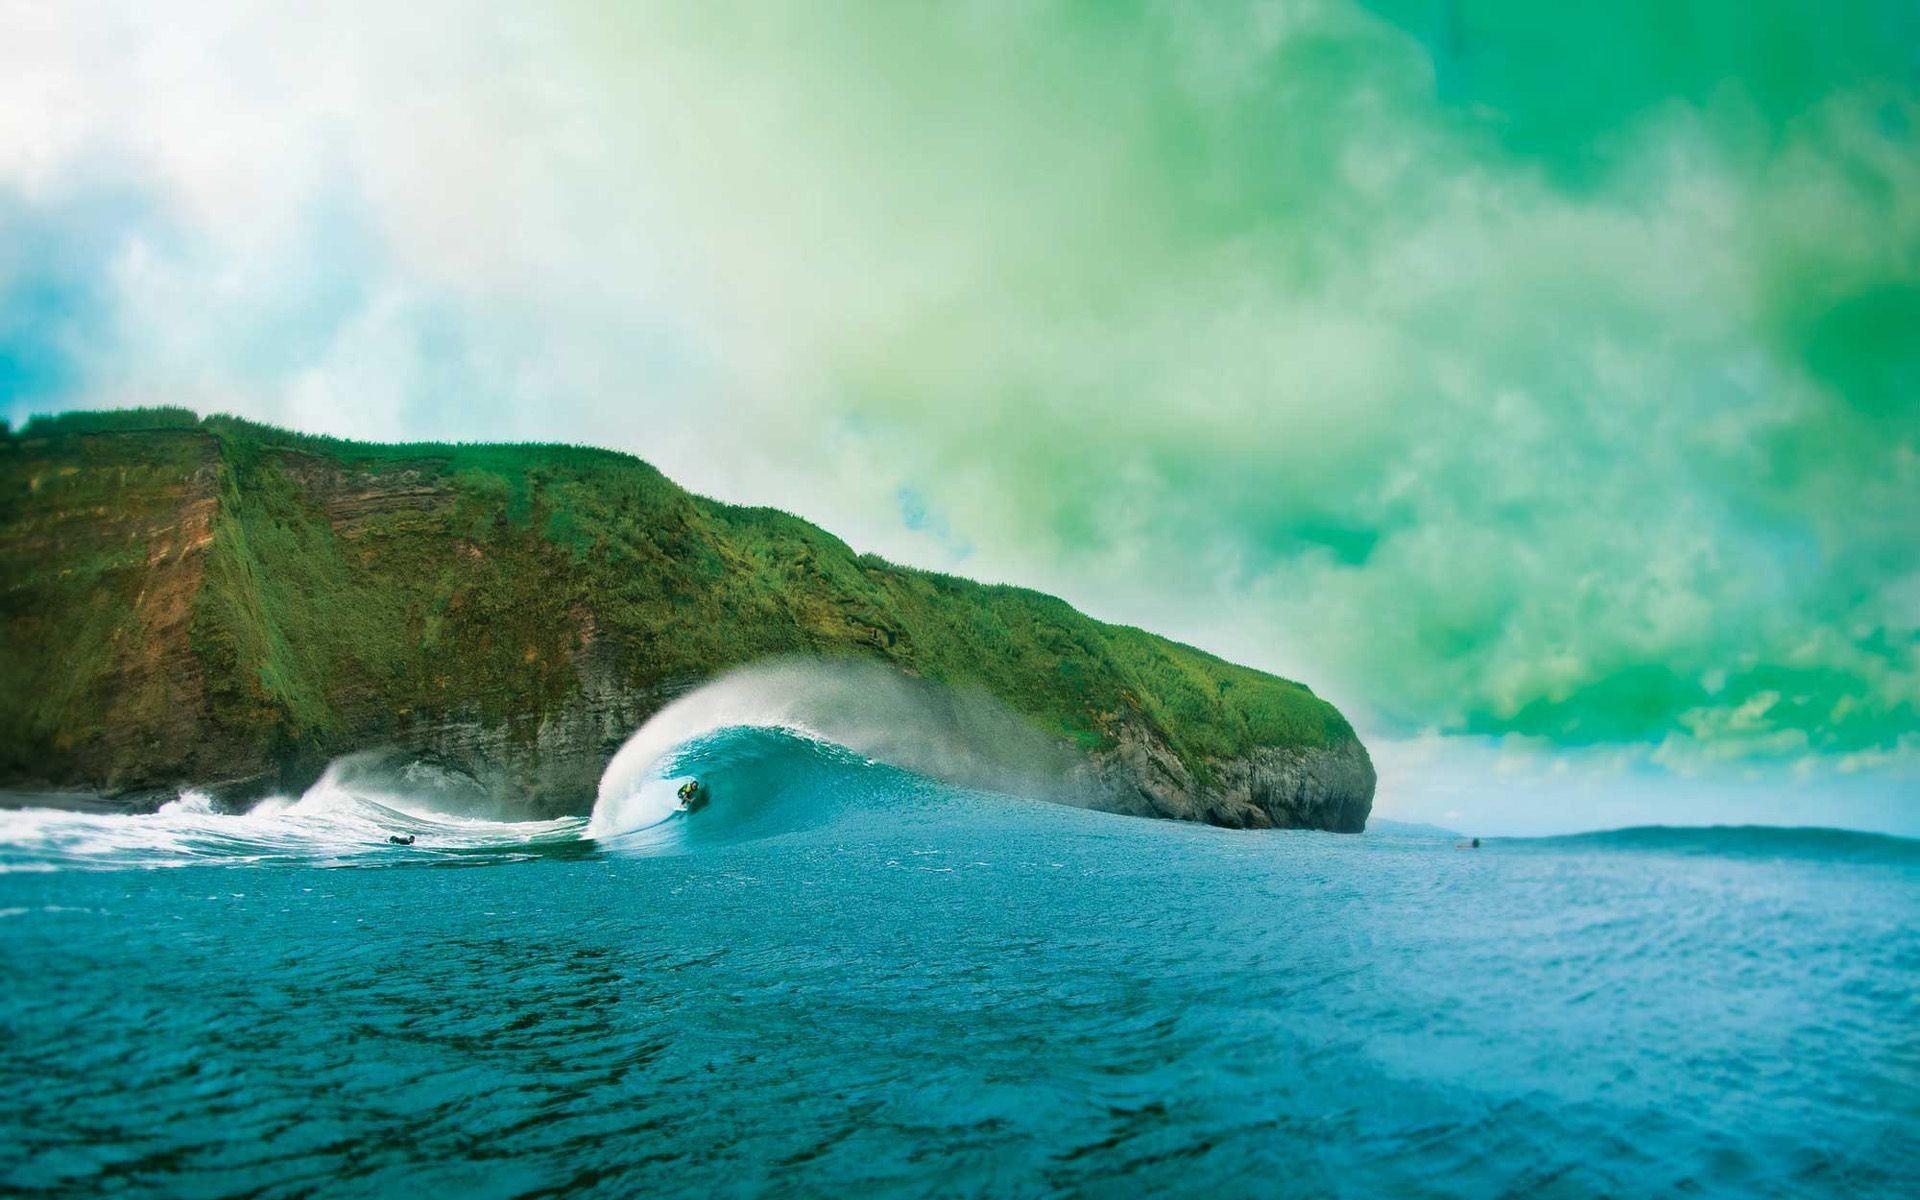 Collection of Surfer Magazine Wallpaper (image in Collection)